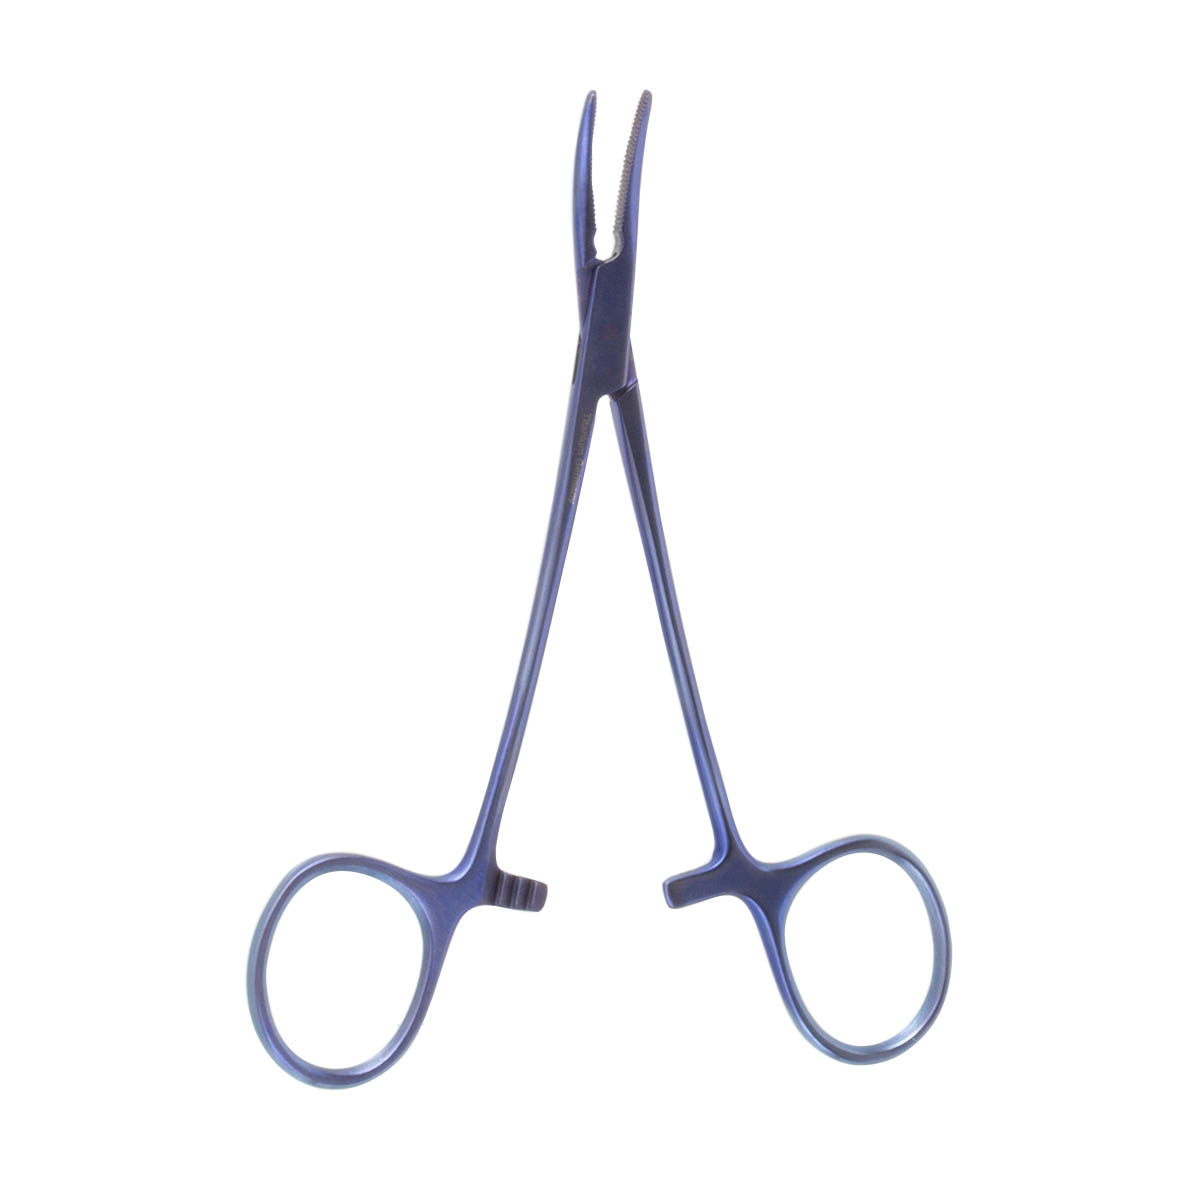 5 Halsted Mosquito Forceps - curved Titanium - BOSS Surgical Instruments